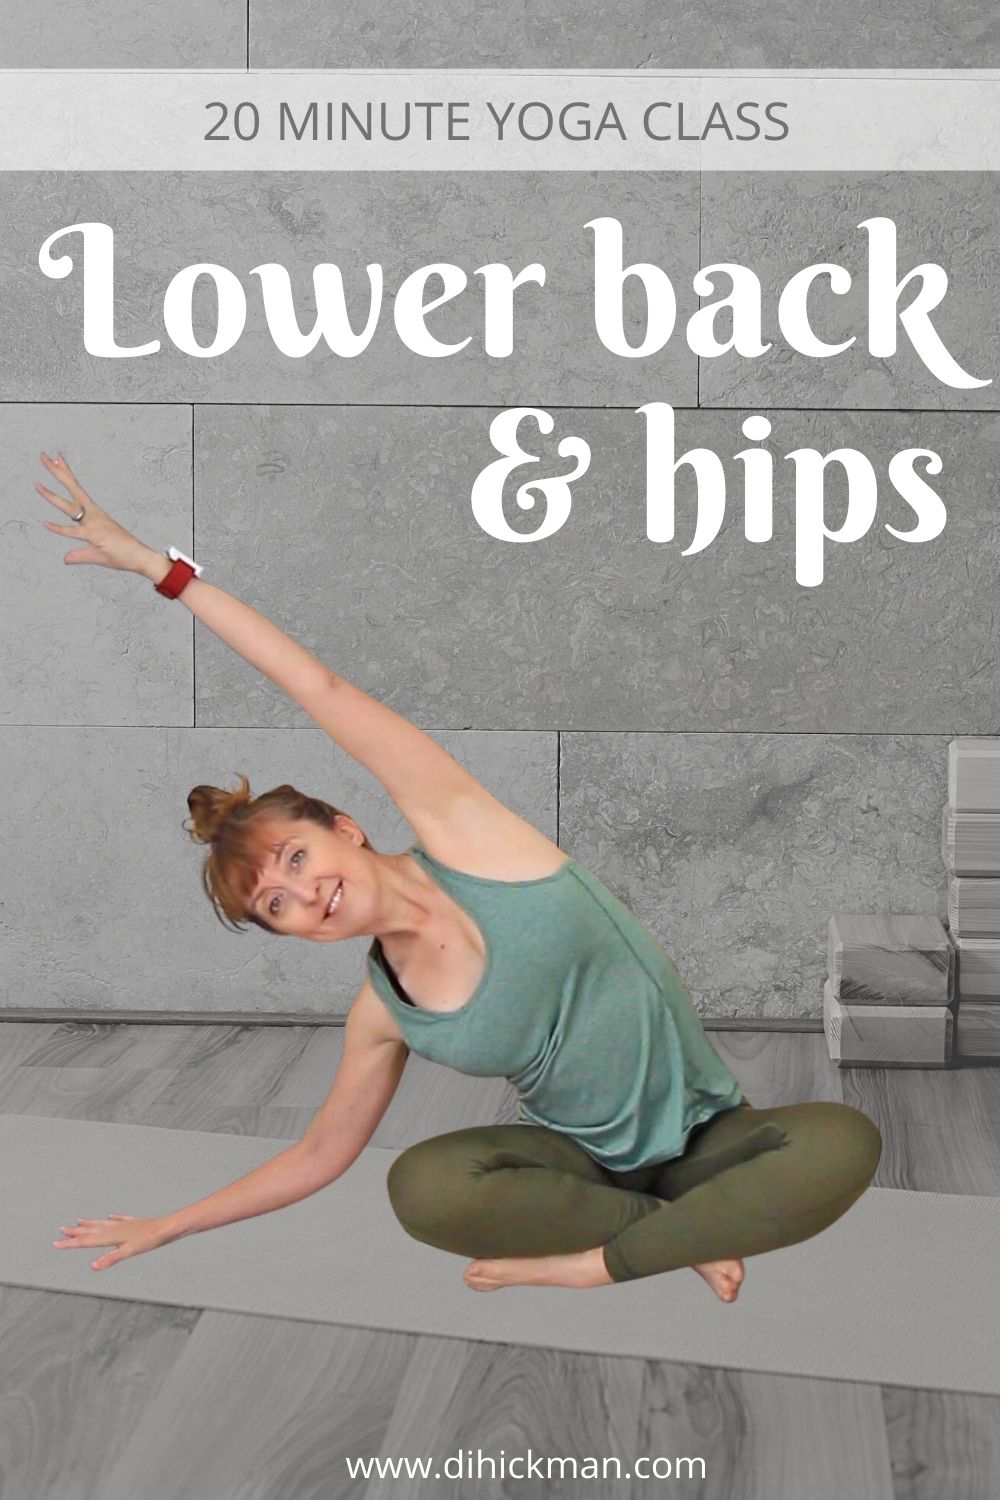 20 Minute Yoga Class for Lower Back & Hips